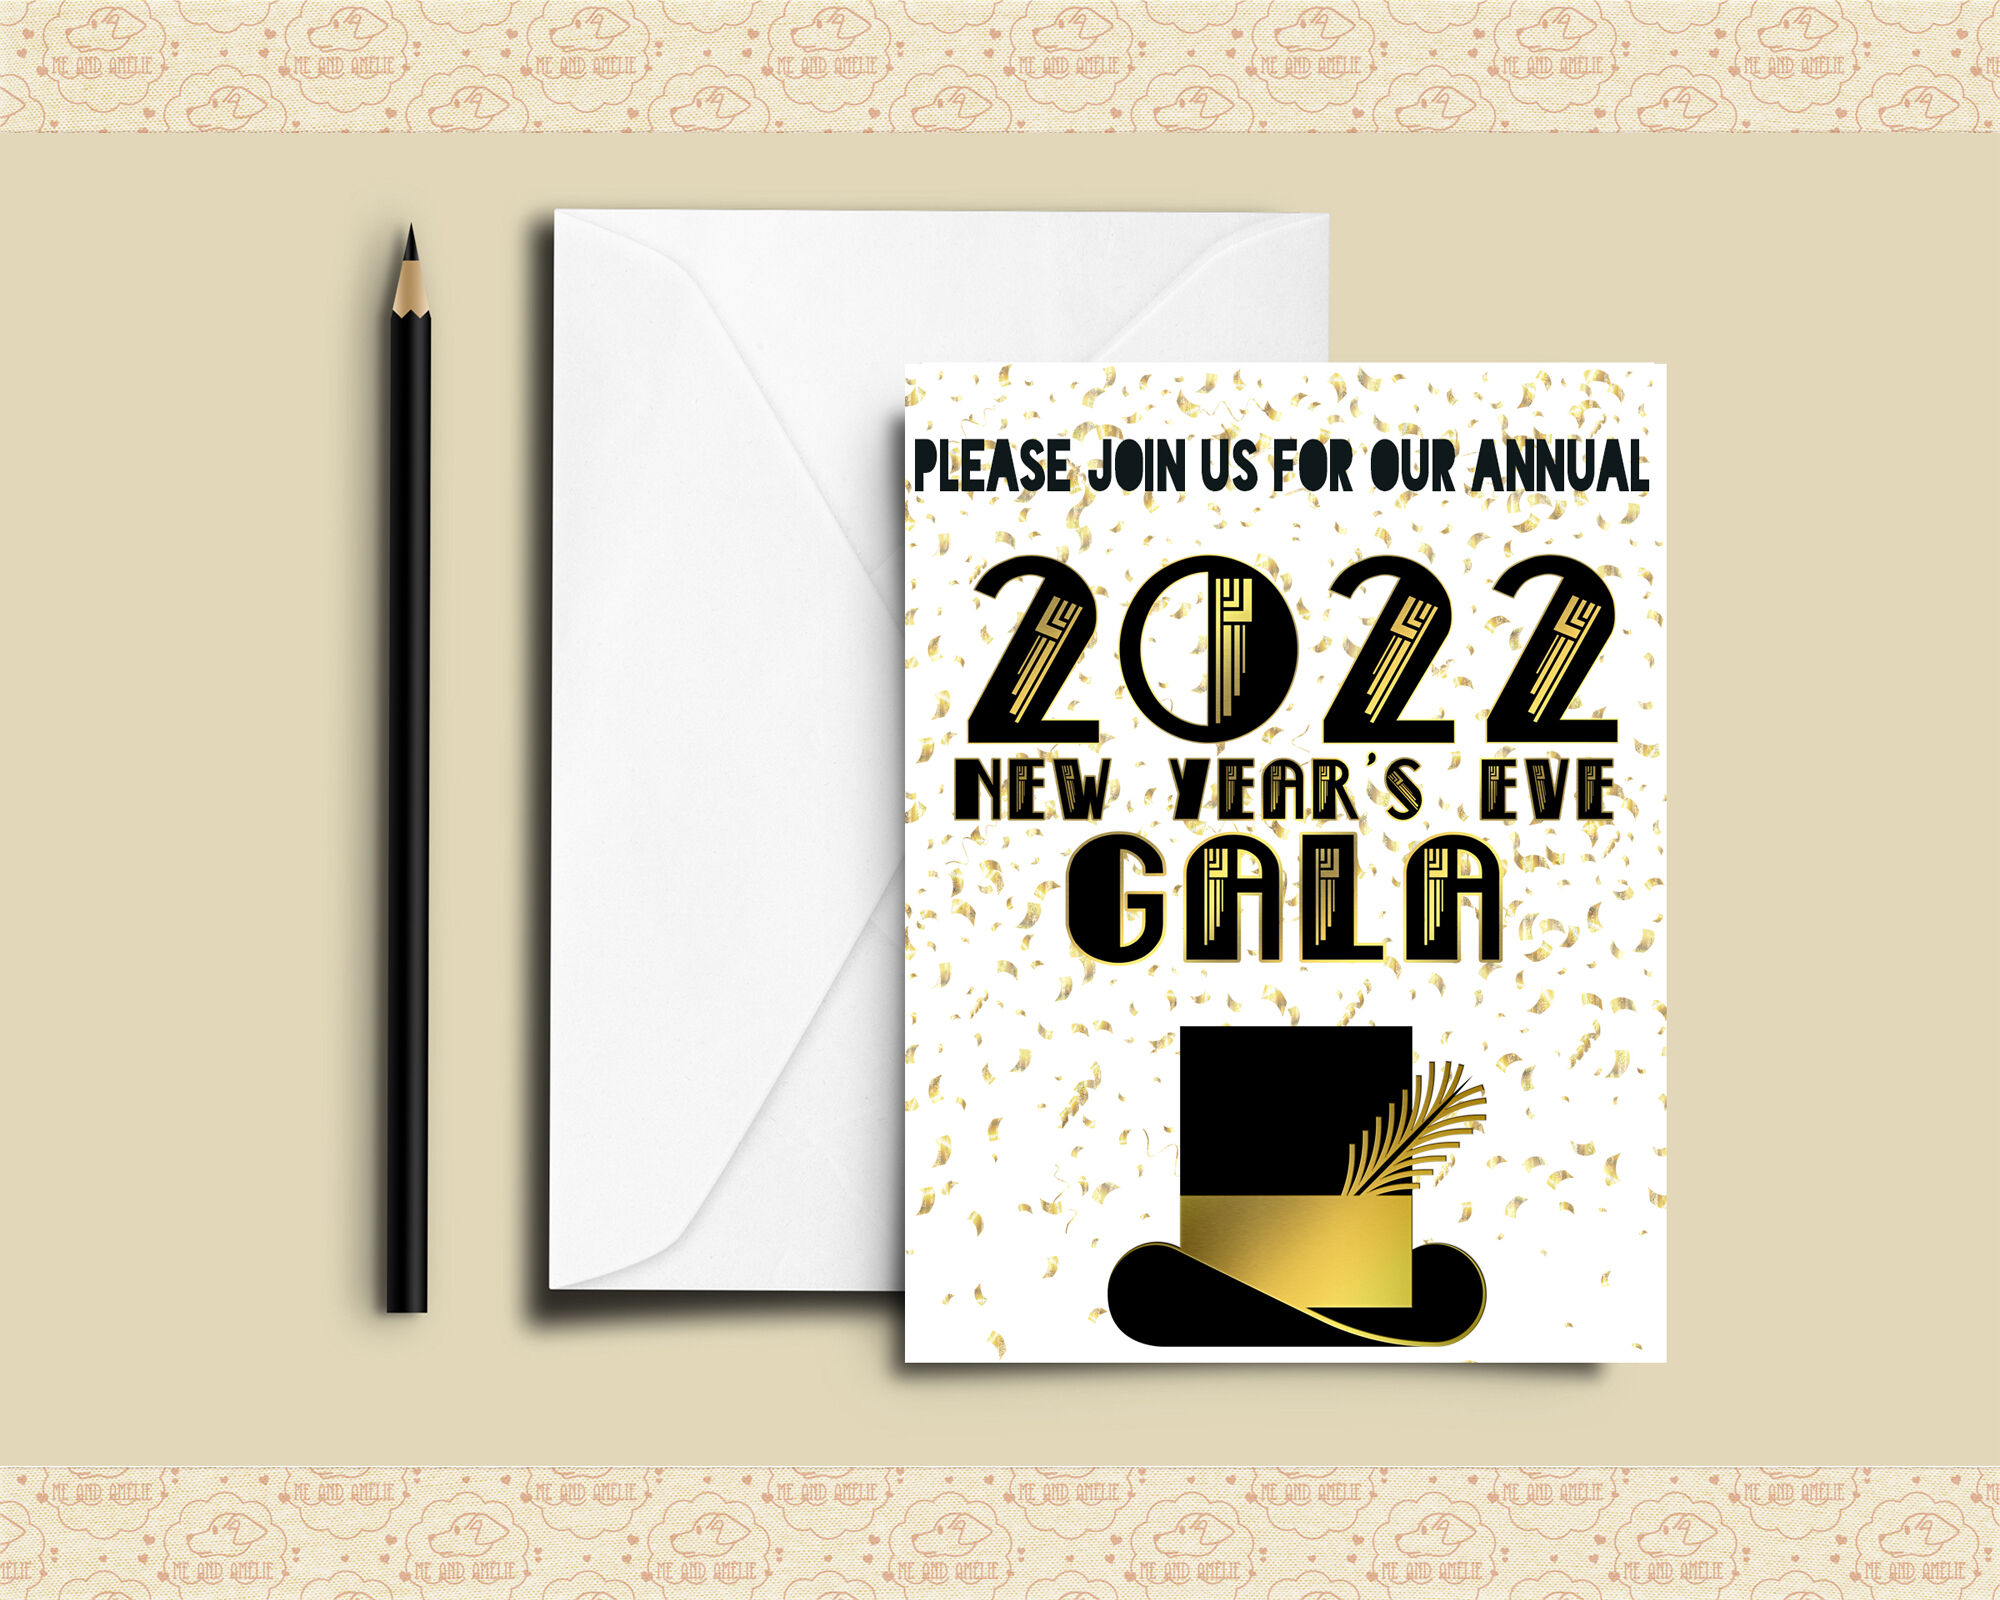 new year images 2022 clip art